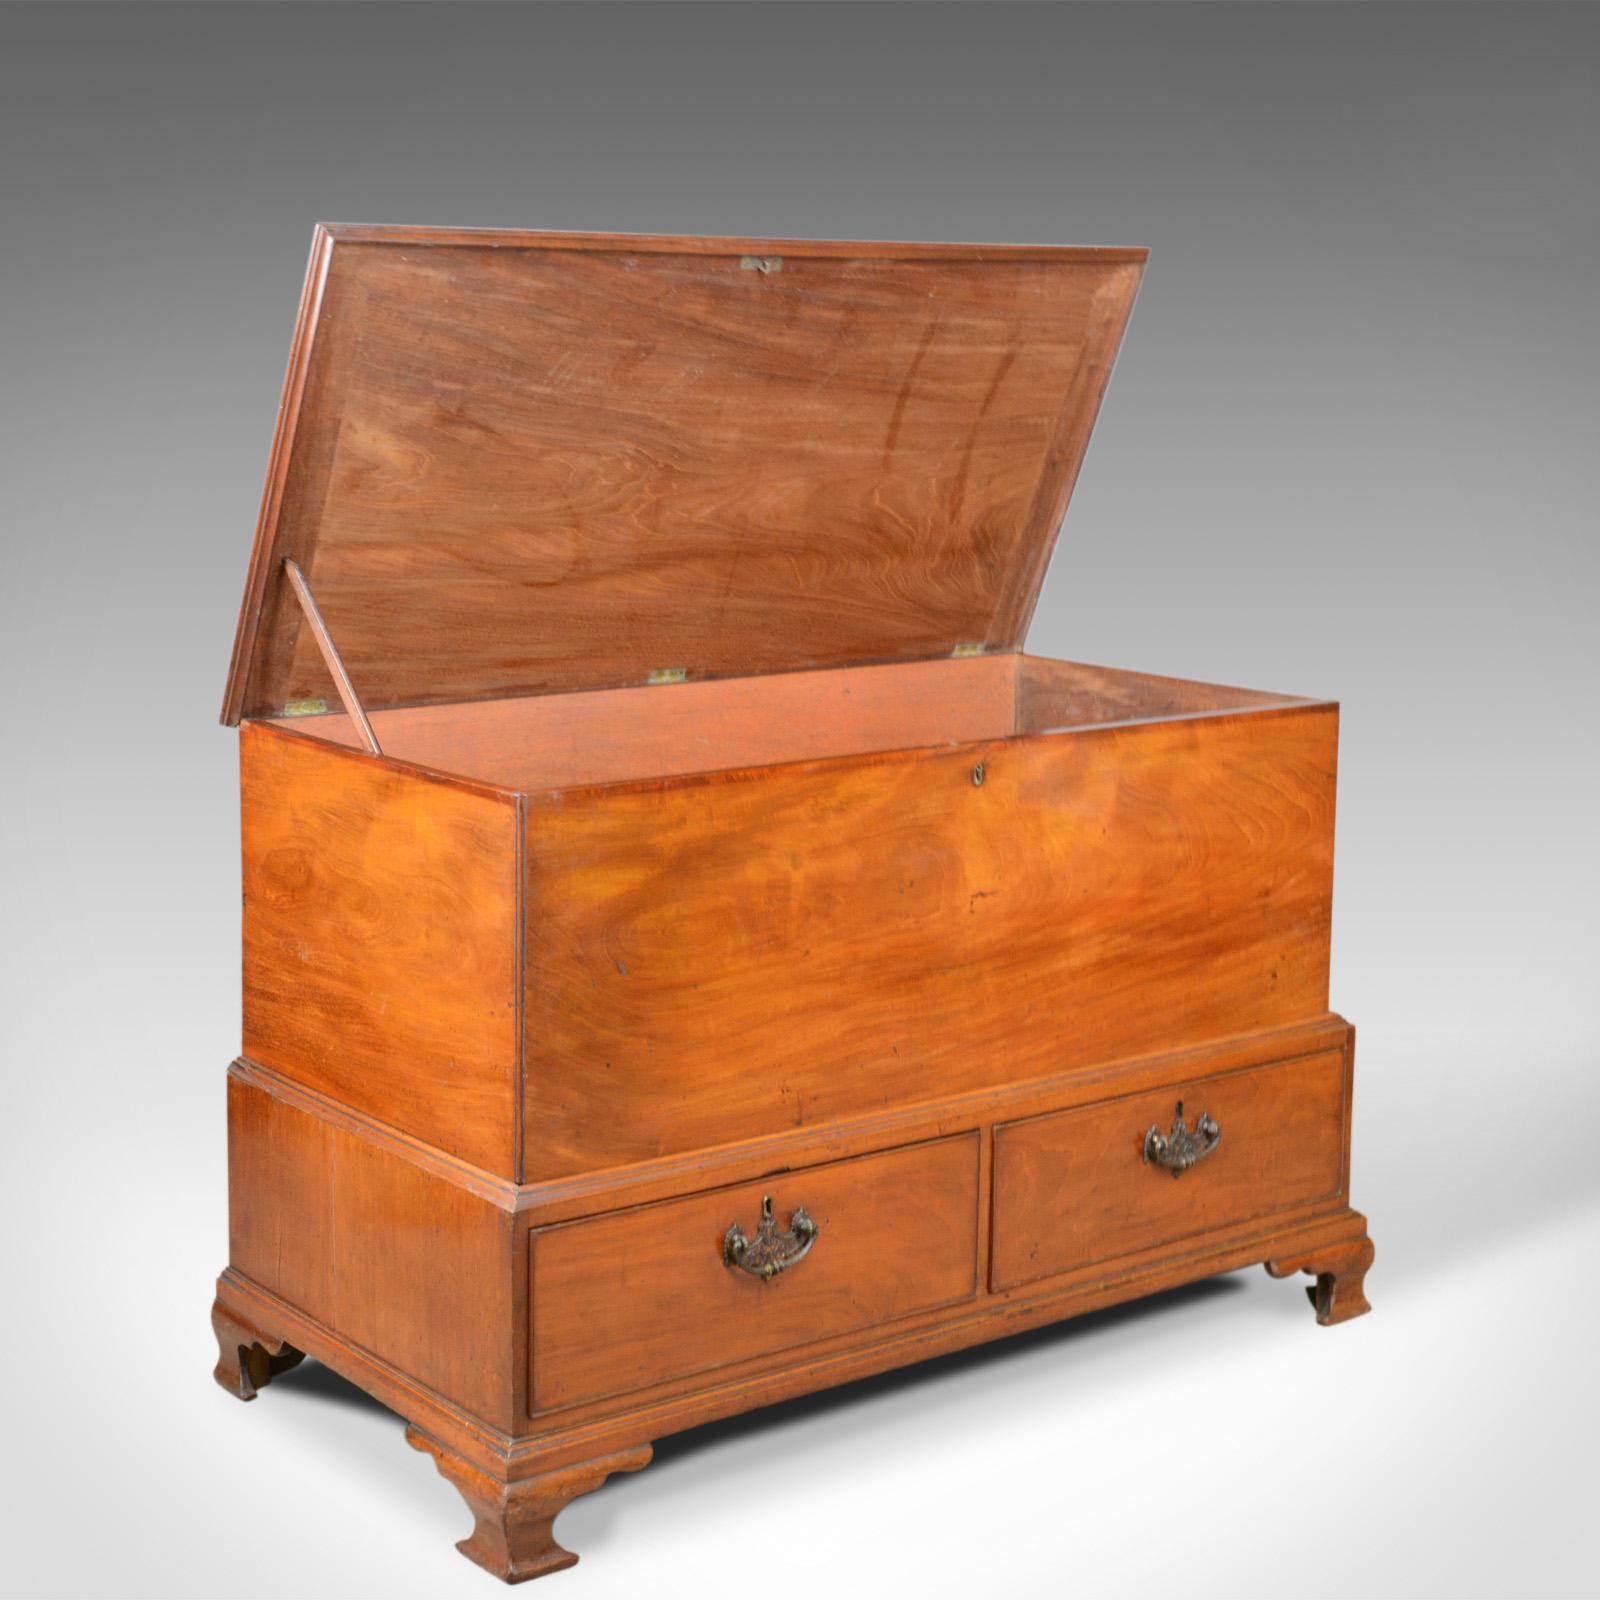 Antique, Mule Chest, English, Georgian Housekeepers Trunk, Mahogany, circa 1780 In Good Condition For Sale In Hele, Devon, GB